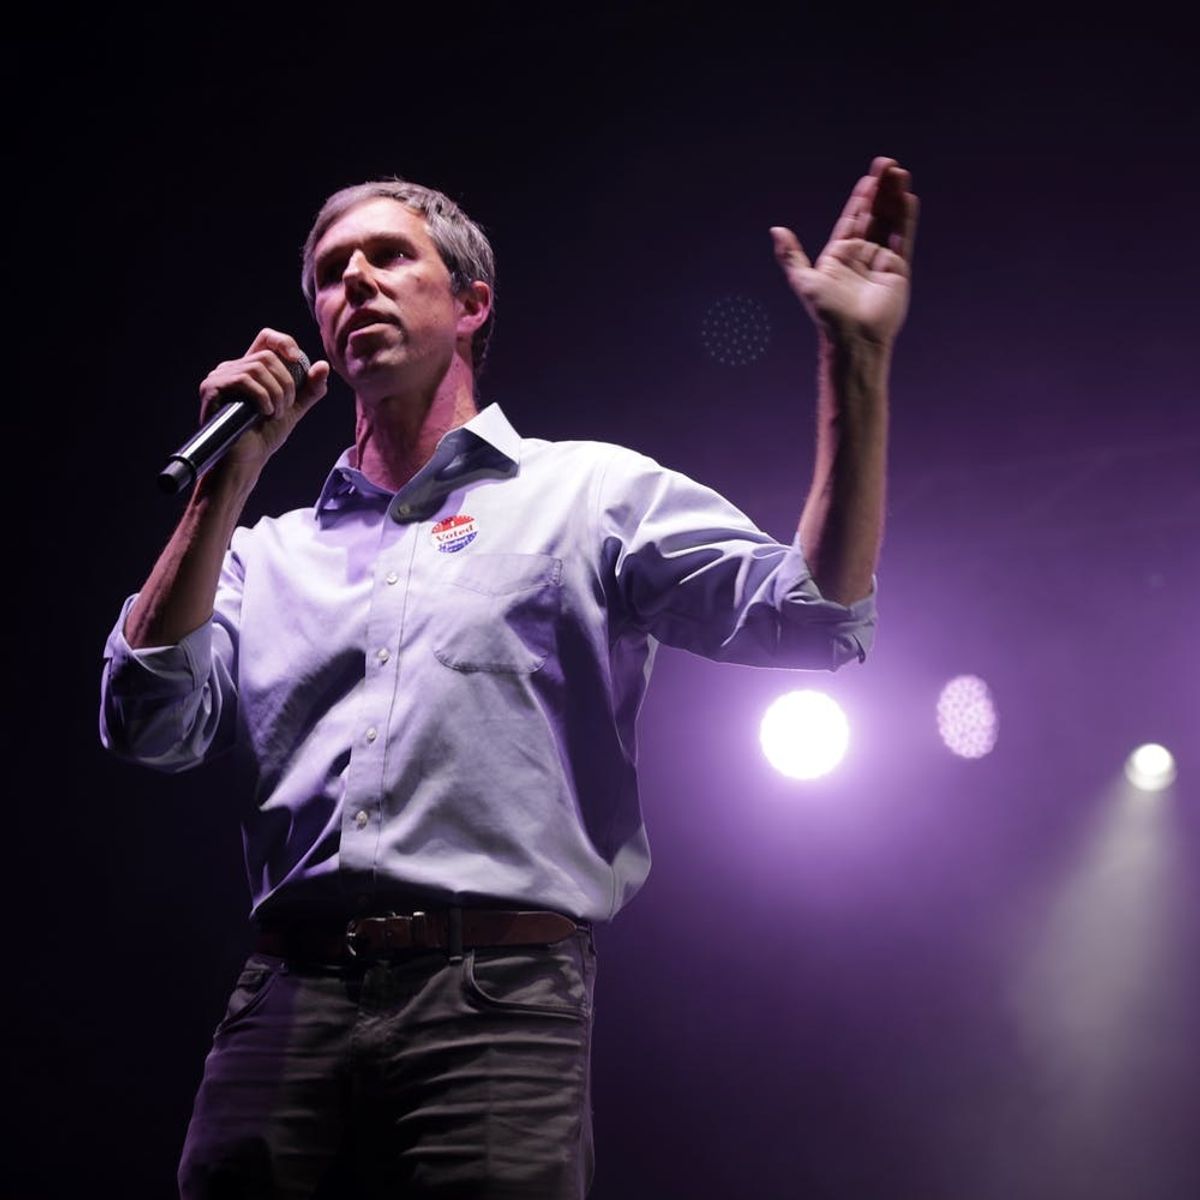 Ted Cruz May Have Won the Senate, But Beto O’Rourke’s Influence Has Only Begun